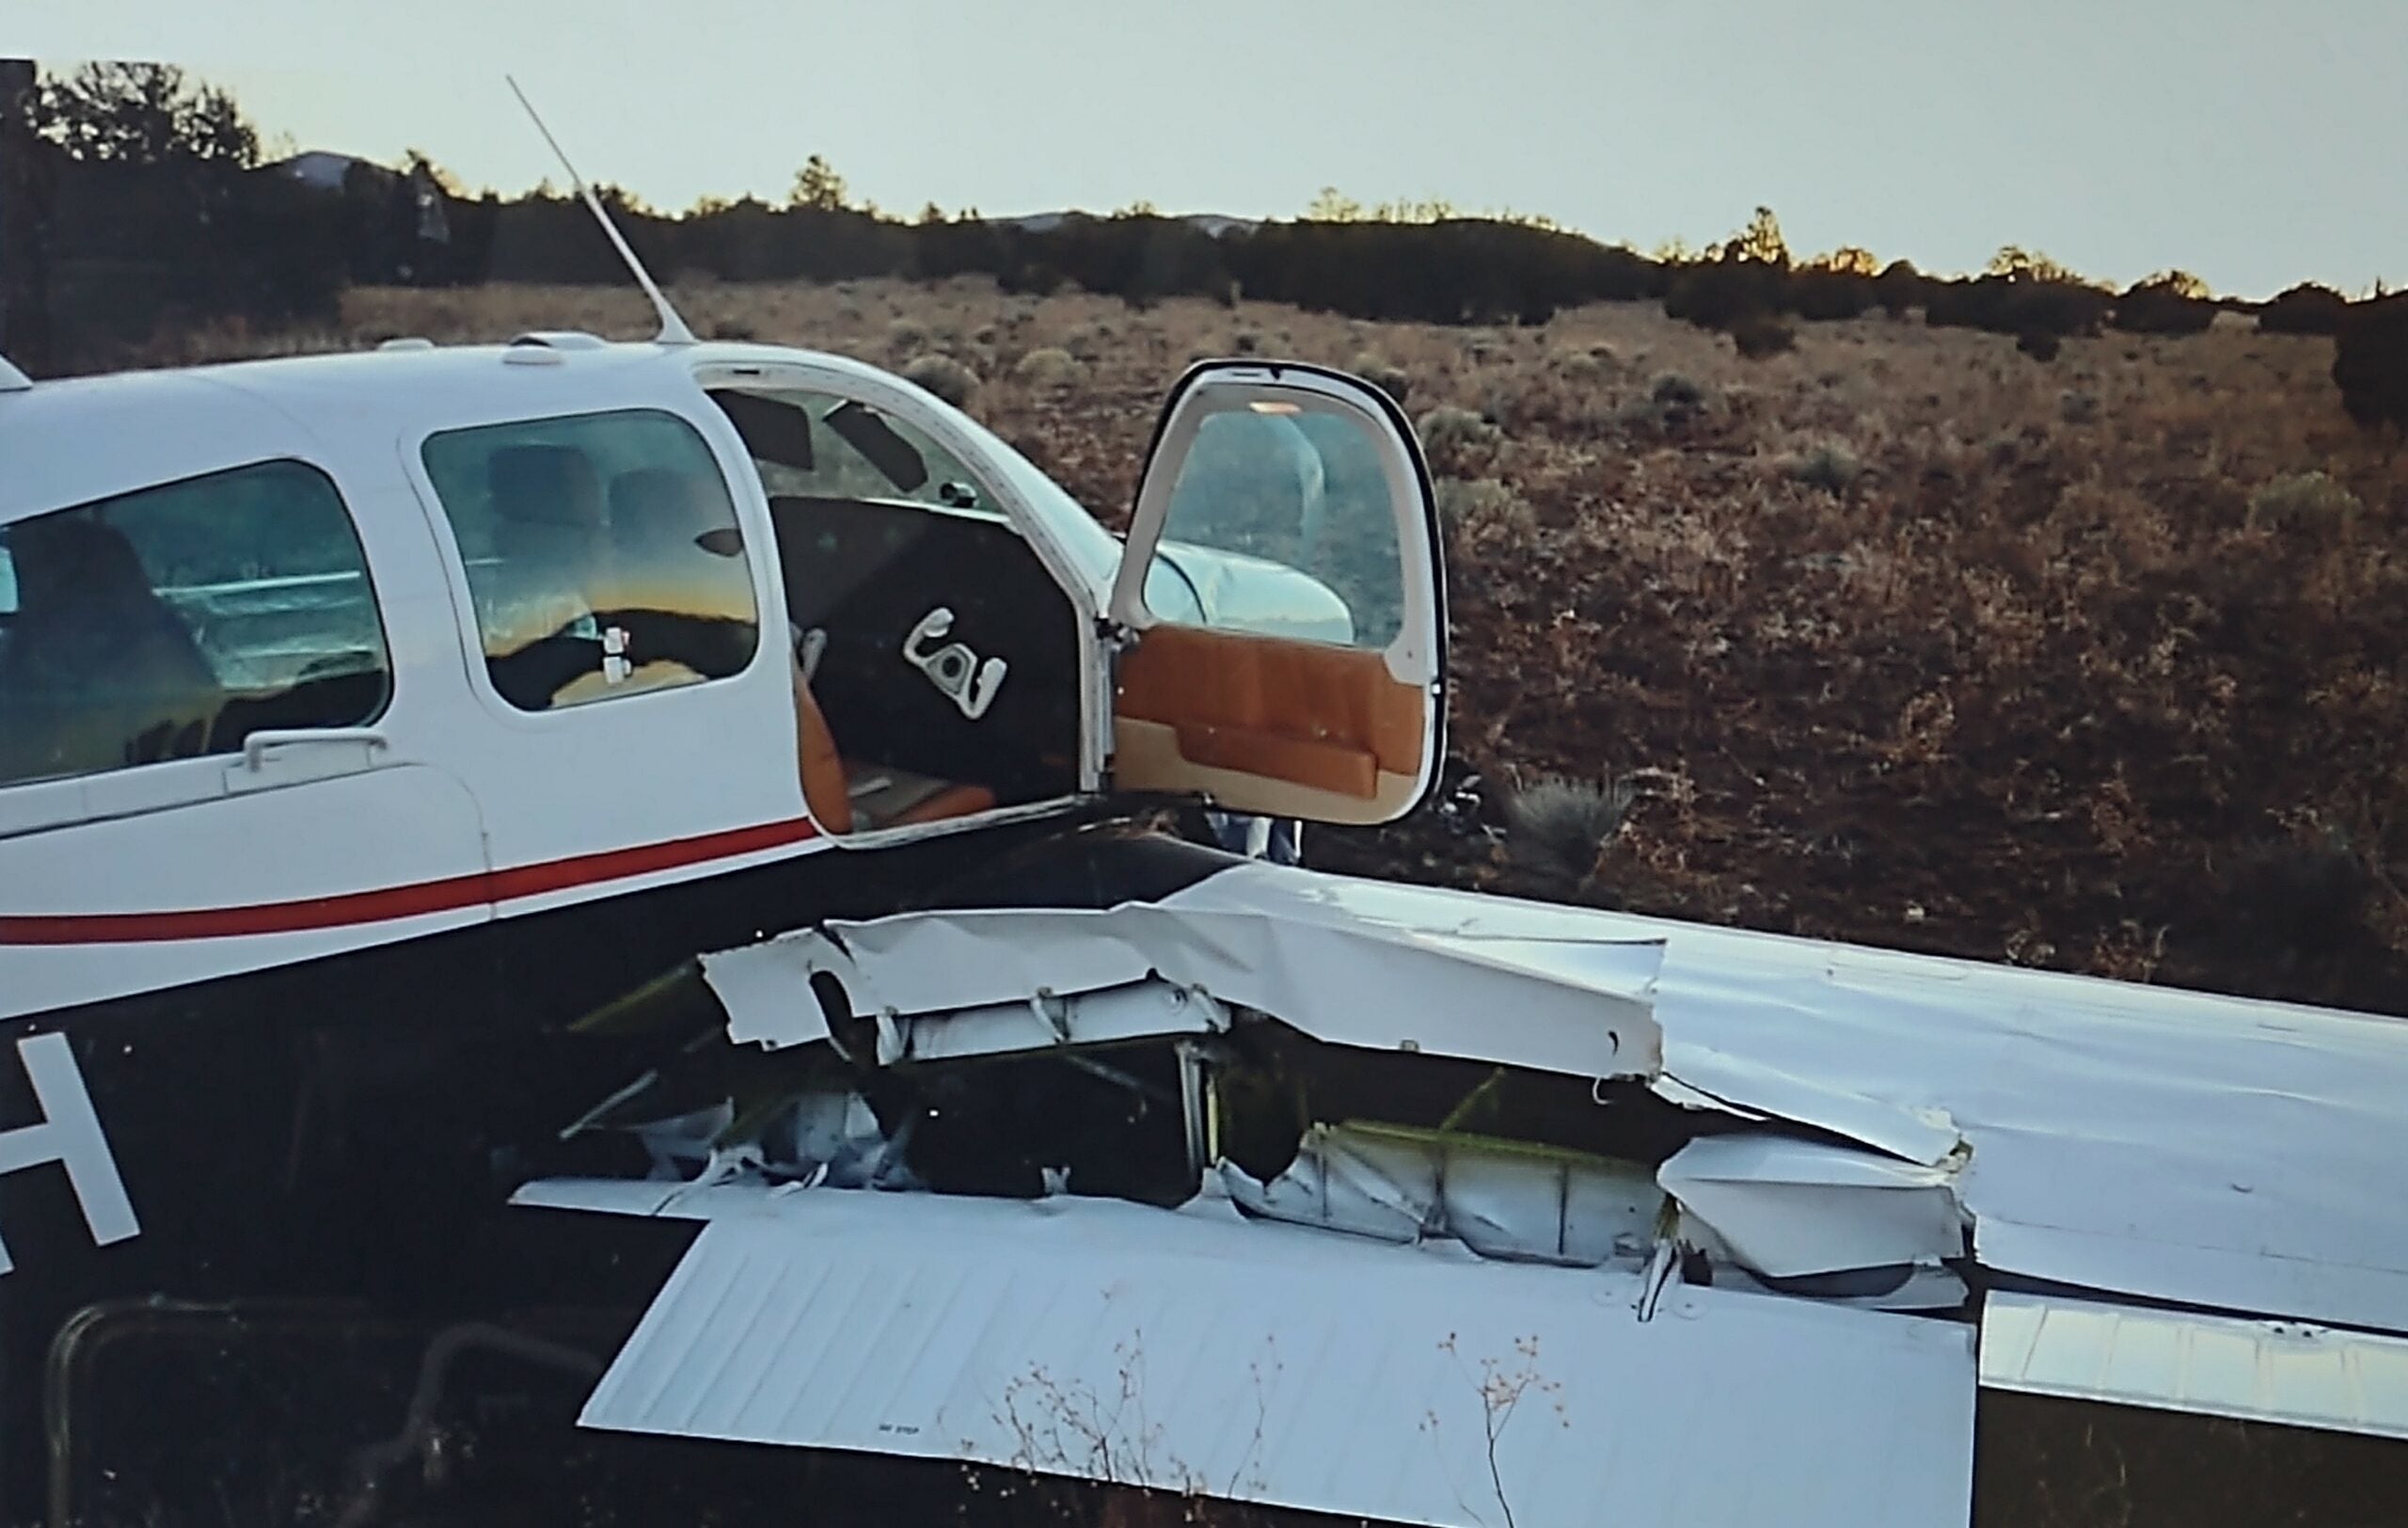 Pilots Can Learn from NTSB Final Report on Bonanza Accident in Arizona